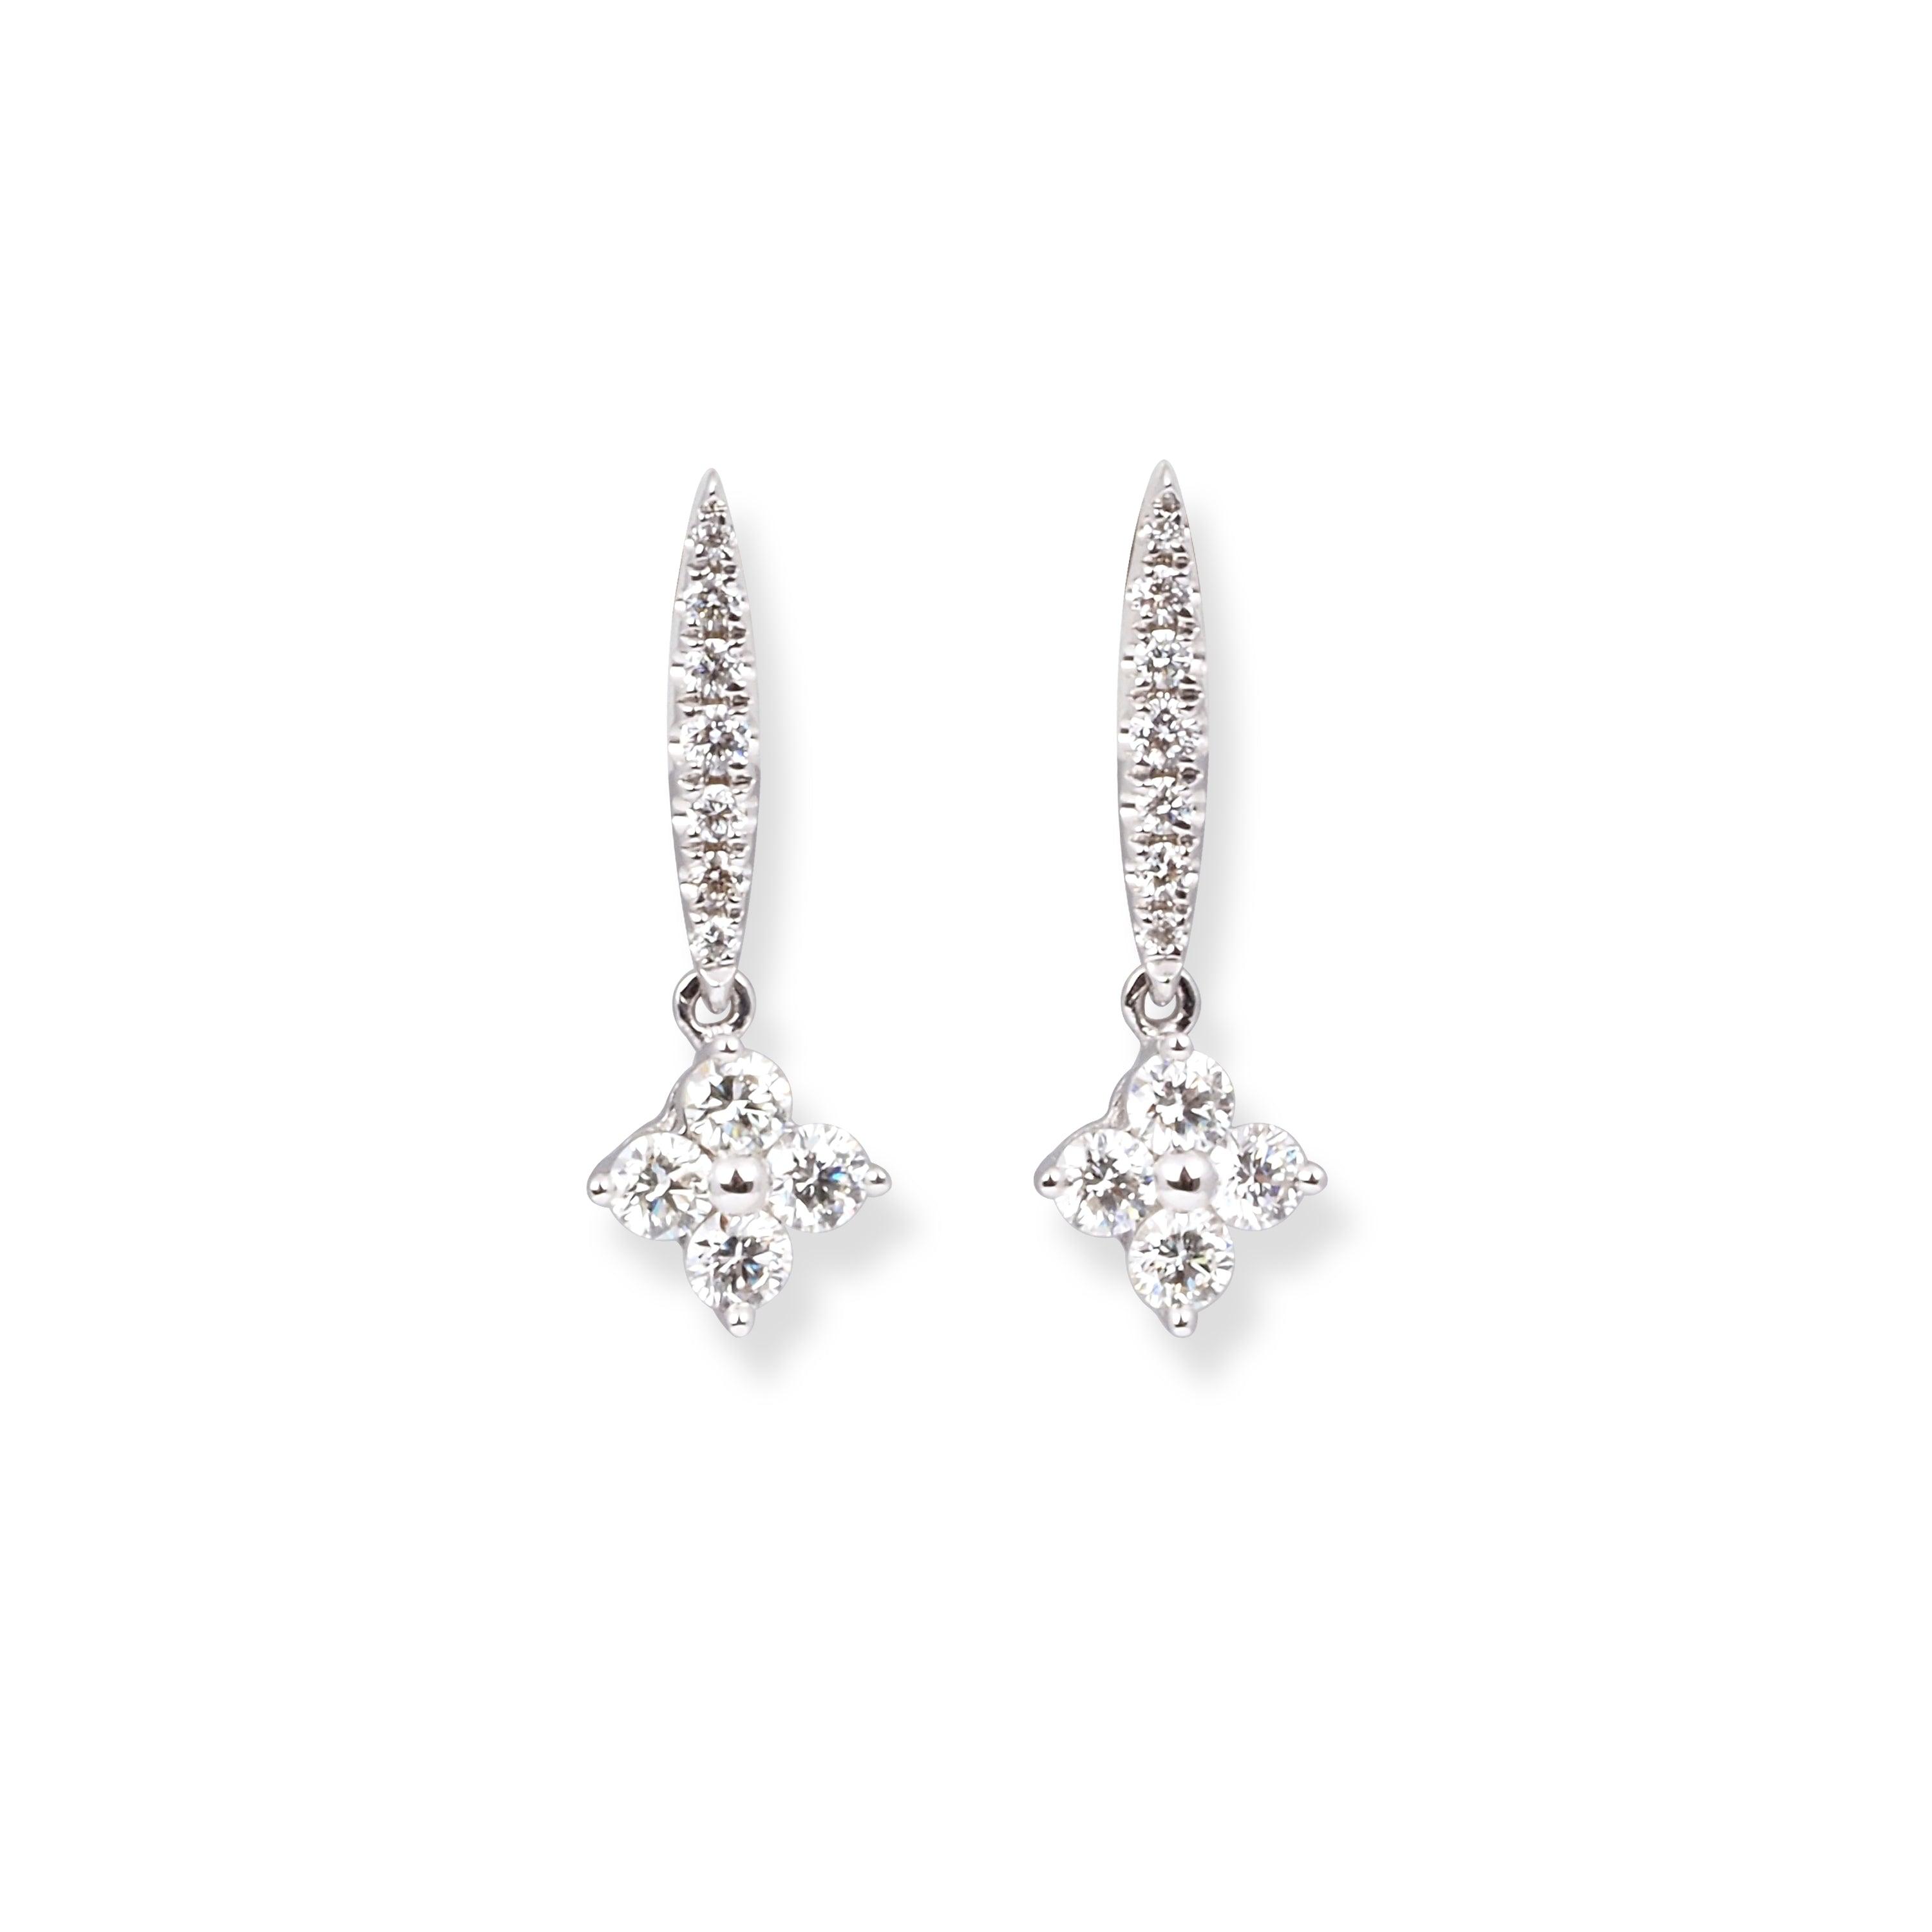 18ct White Gold Diamond Earrings with Drop Design E-7974 - Minar Jewellers